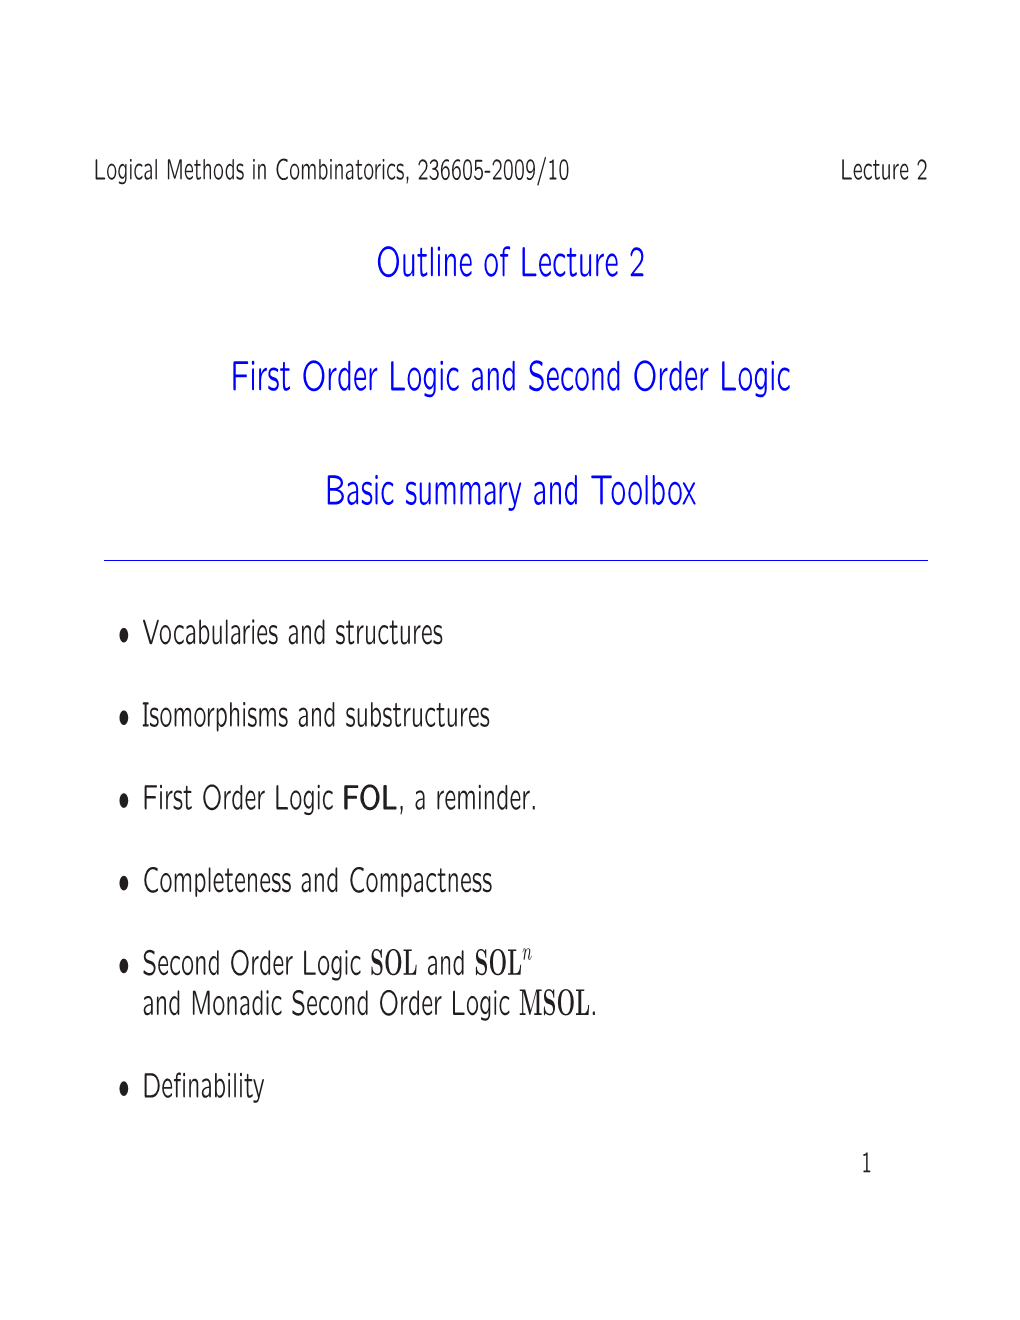 Outline of Lecture 2 First Order Logic and Second Order Logic Basic Summary and Toolbox